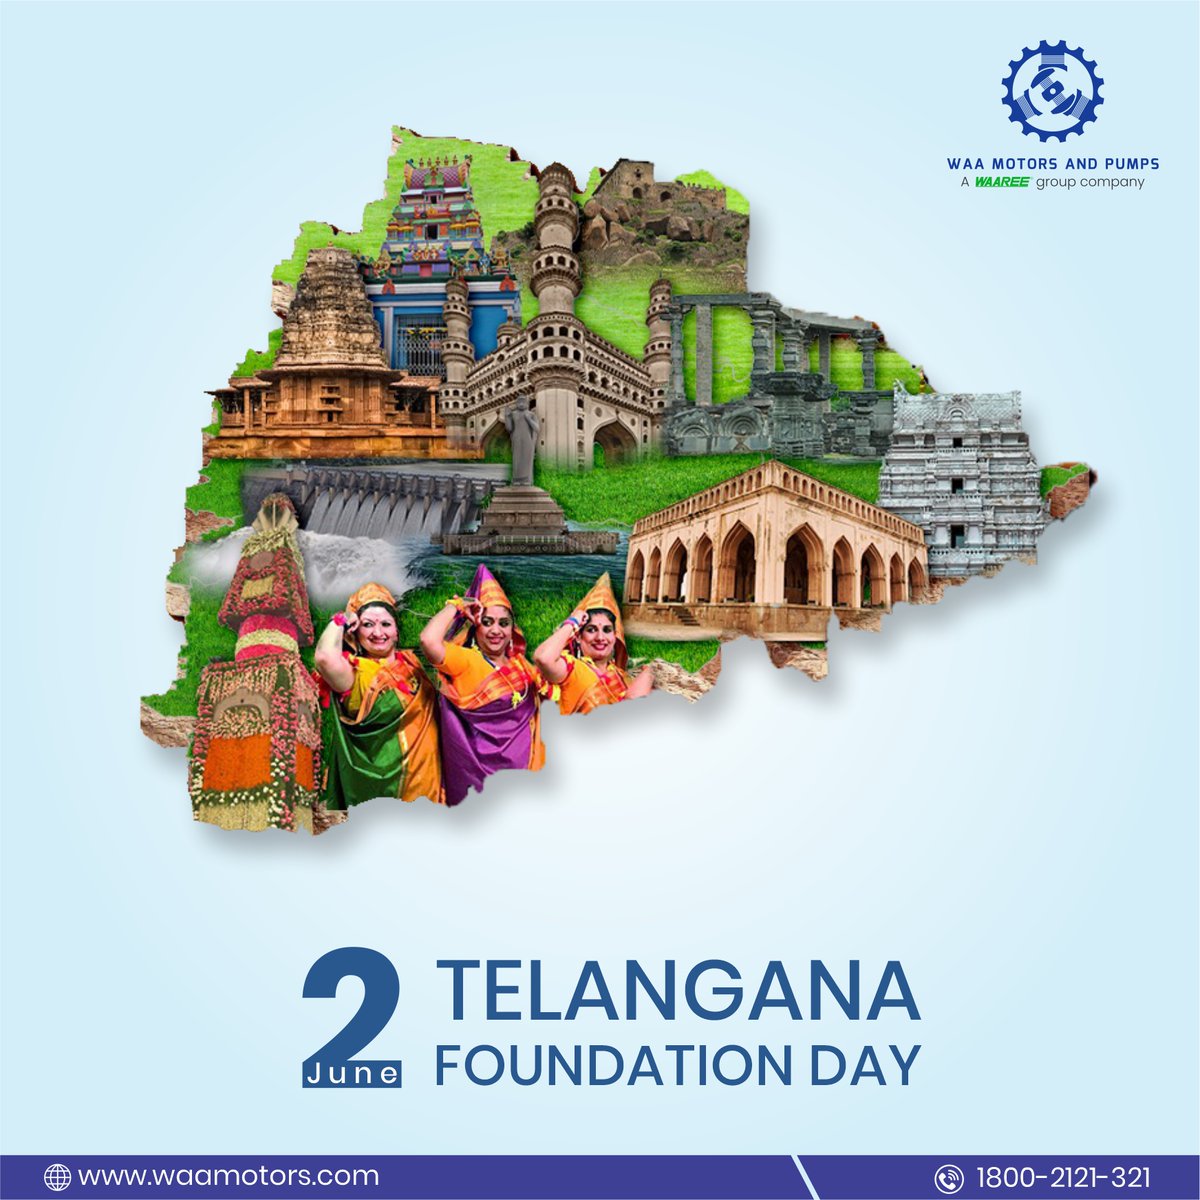 We wish the residents of Telangana a year full of growth and boundless joy. May you prosper every day under the light of the Sun.
Happy Telangana Foundation Day!

#TelanganaFoundationDay #HappyFoundationDay #YearofGrowth #TelanganaProgress #WishingYouProsperity